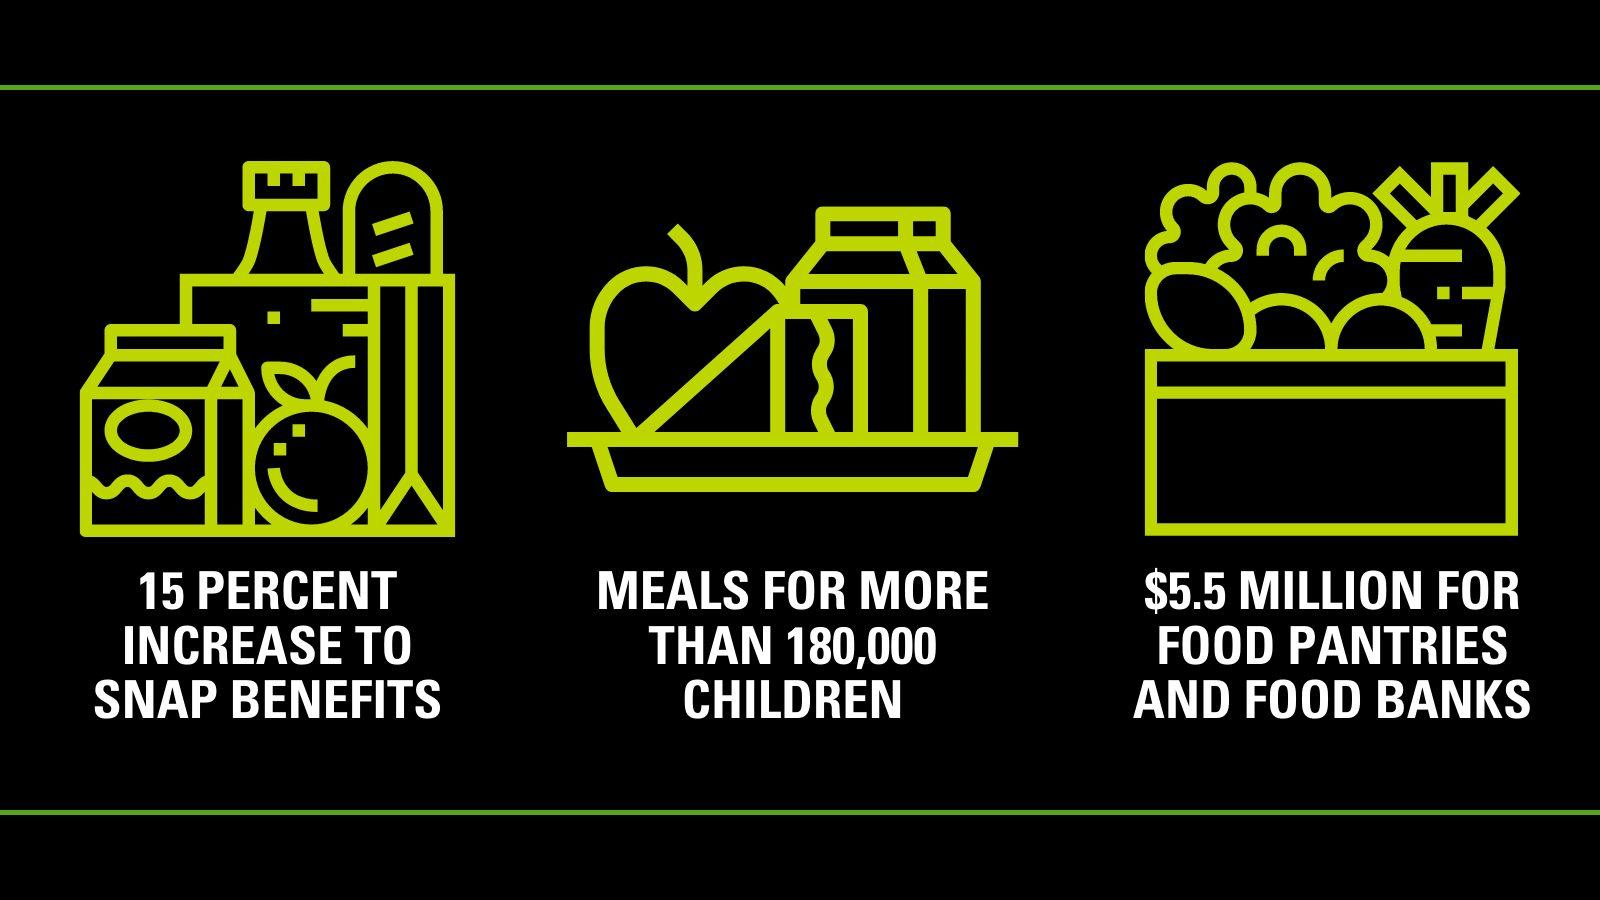 2020 Policy Snapshot (graphics of food) stats: 15 percent increase to snap benefits, meals for more than 180,000 children, $5 million for food pantries and food banks